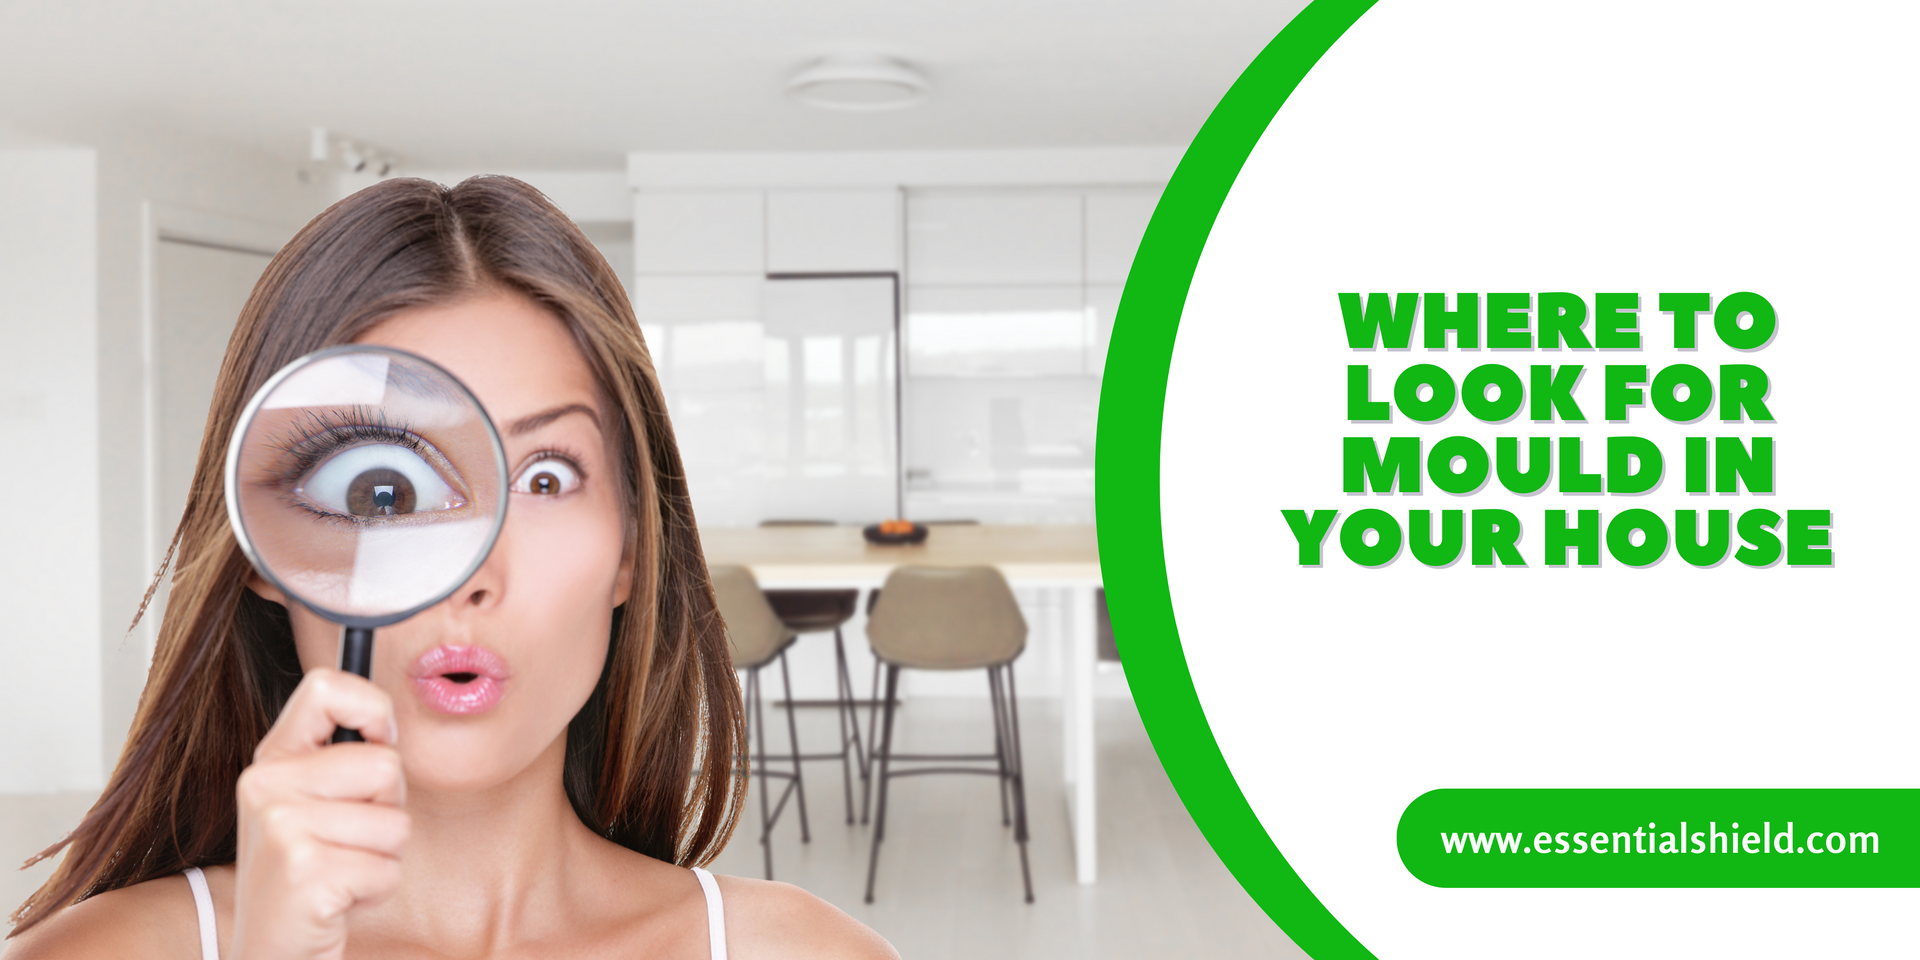 Worried about mould in your house? Contact Essential Shield Australia